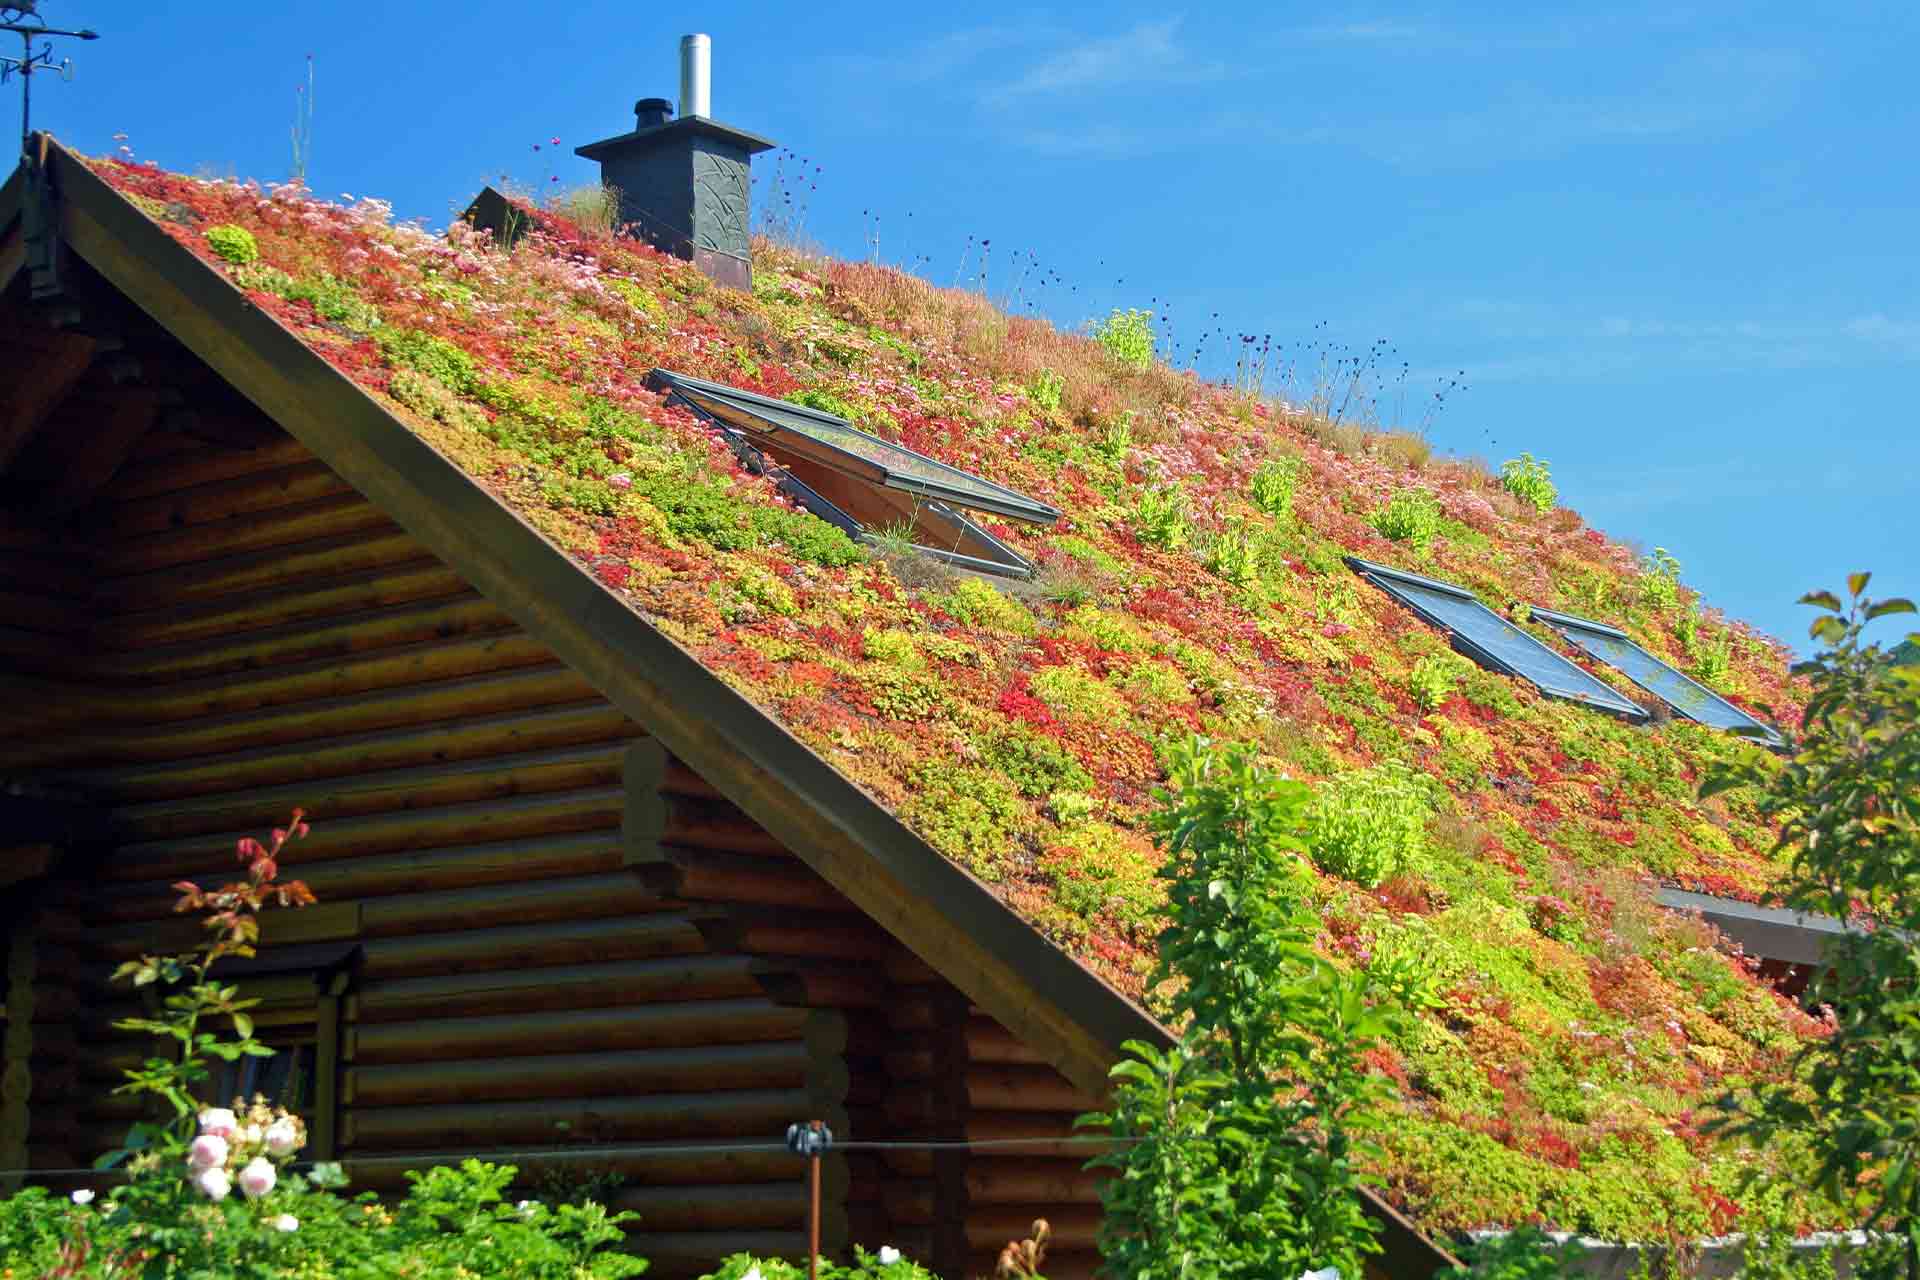 How Much Does a Green Roof Cost in 2021?